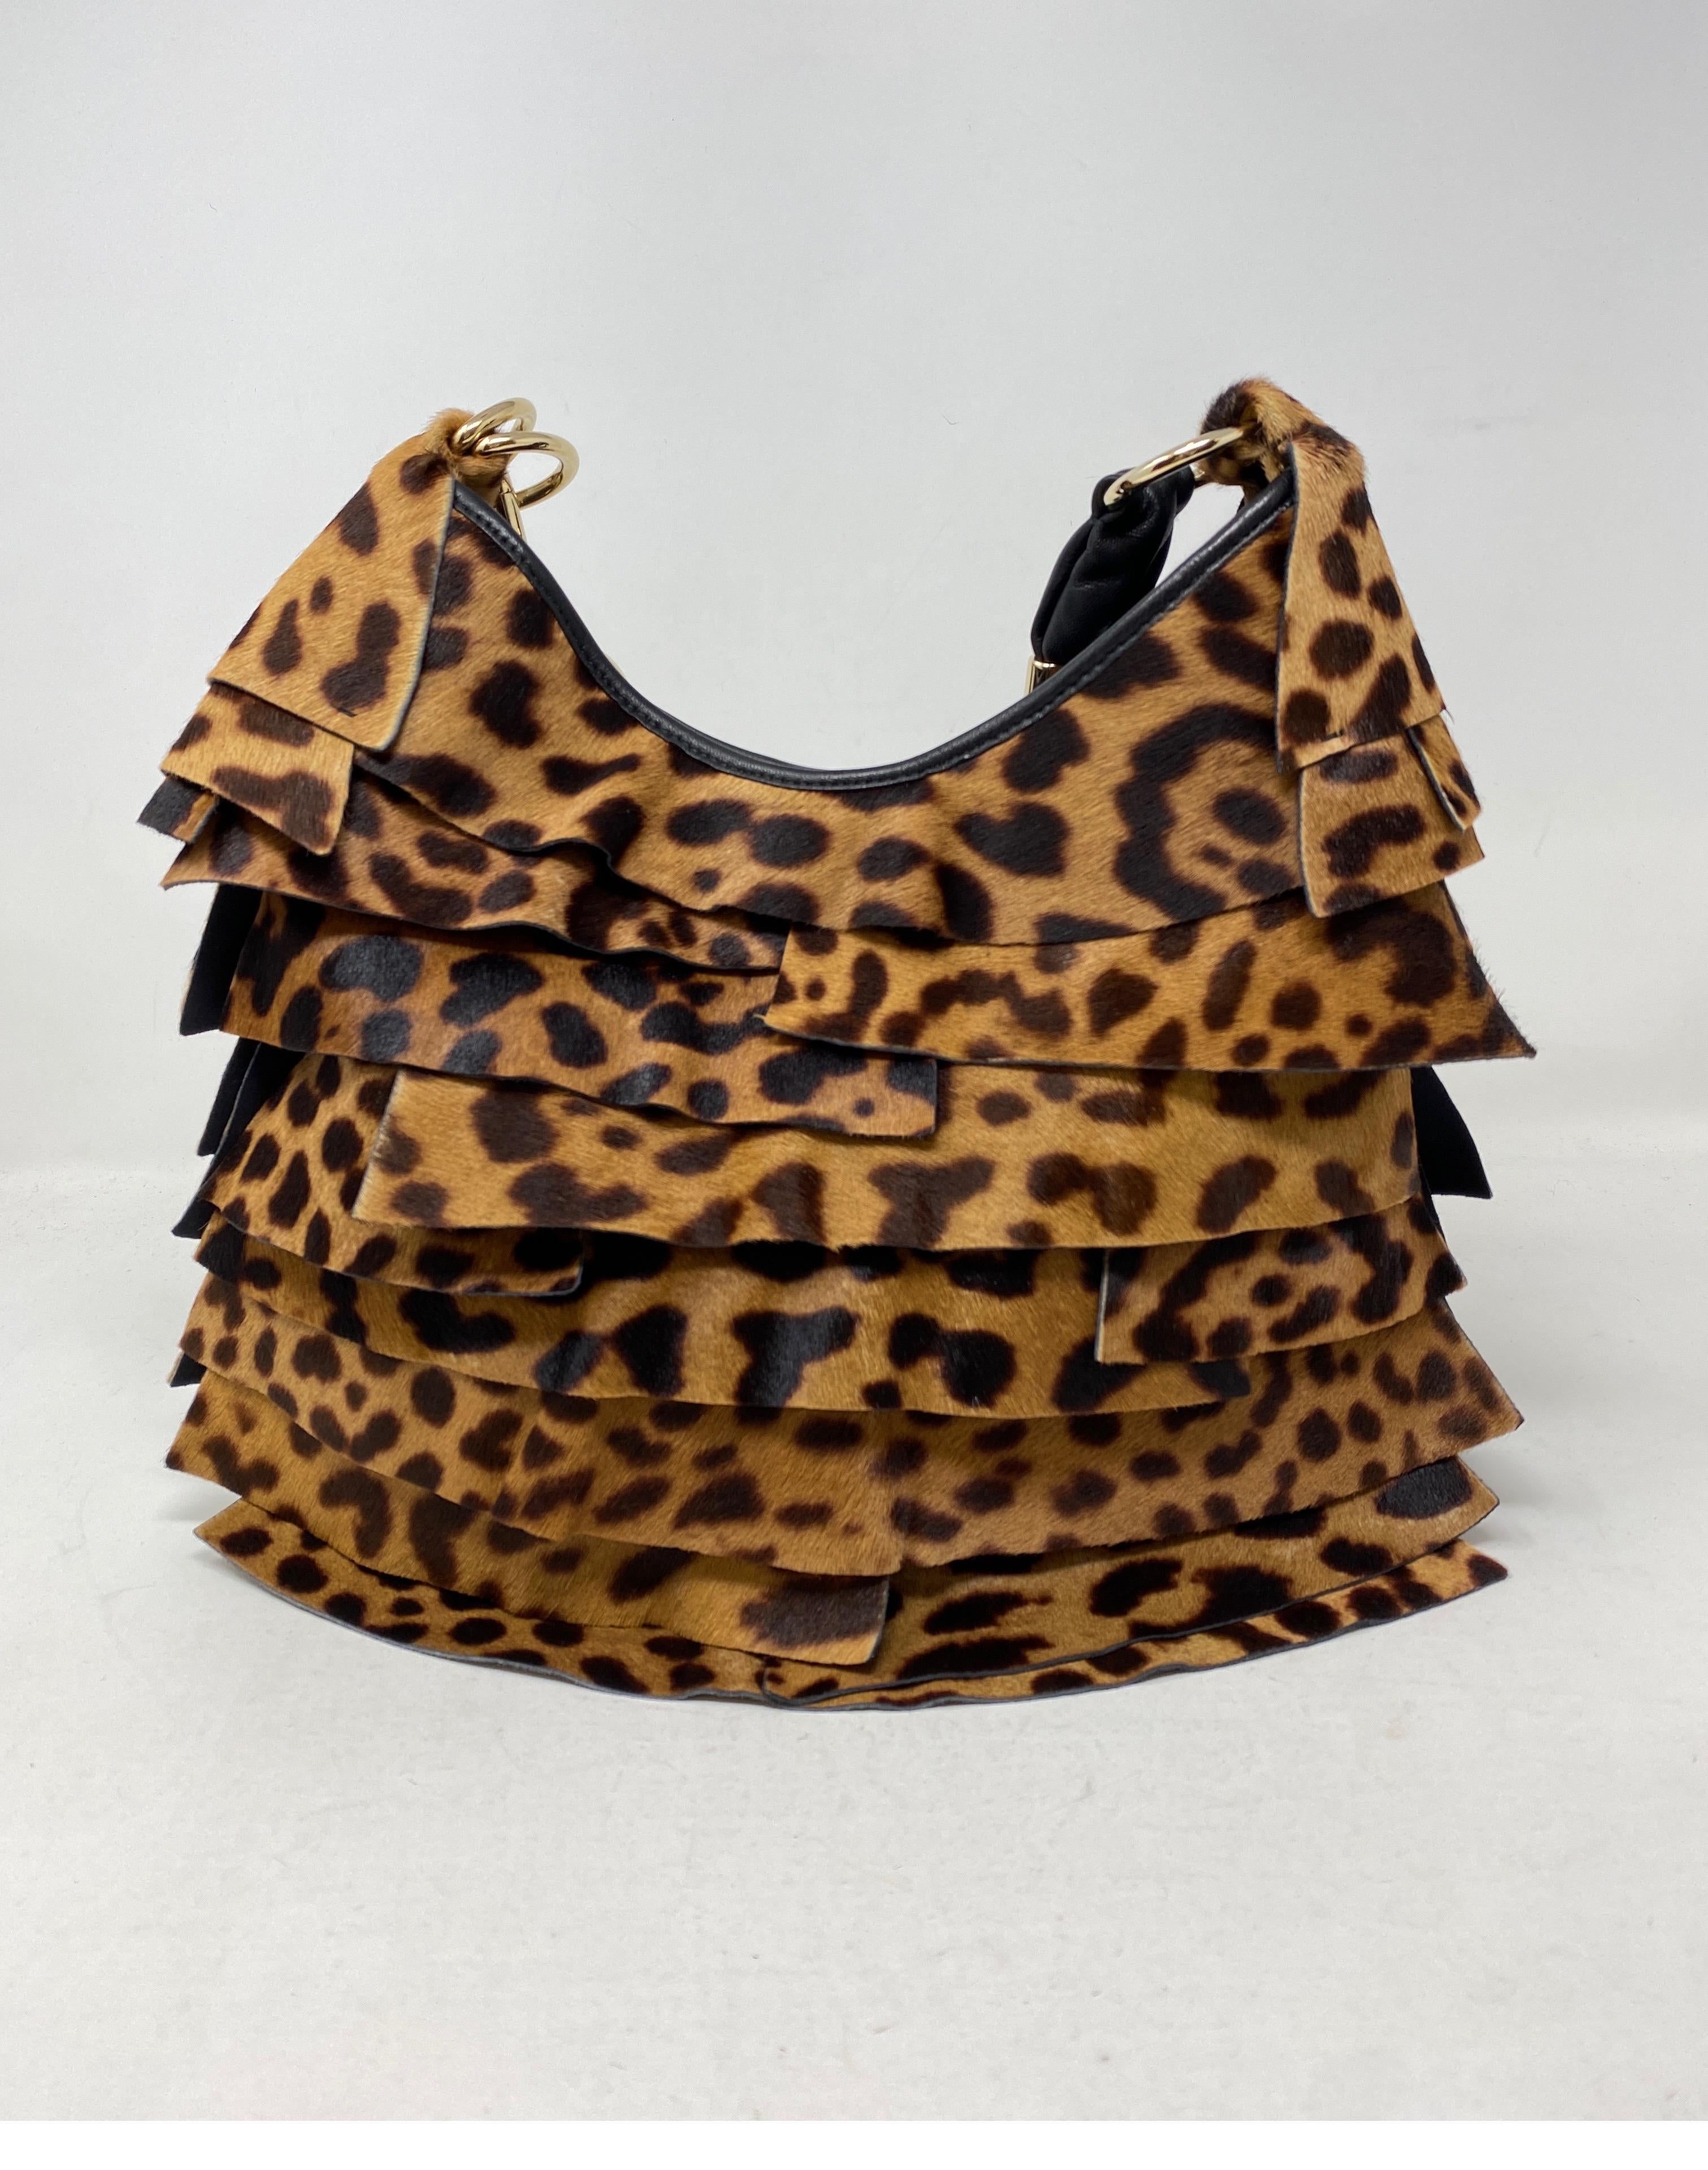 Yves Saint Laurent Leopard Purse. Layered leopard colored leather in hobo style bag. Nice black leather handle. Gold hardware. Mint like new condition. Unique fun bag. Guaranteed authentic. 